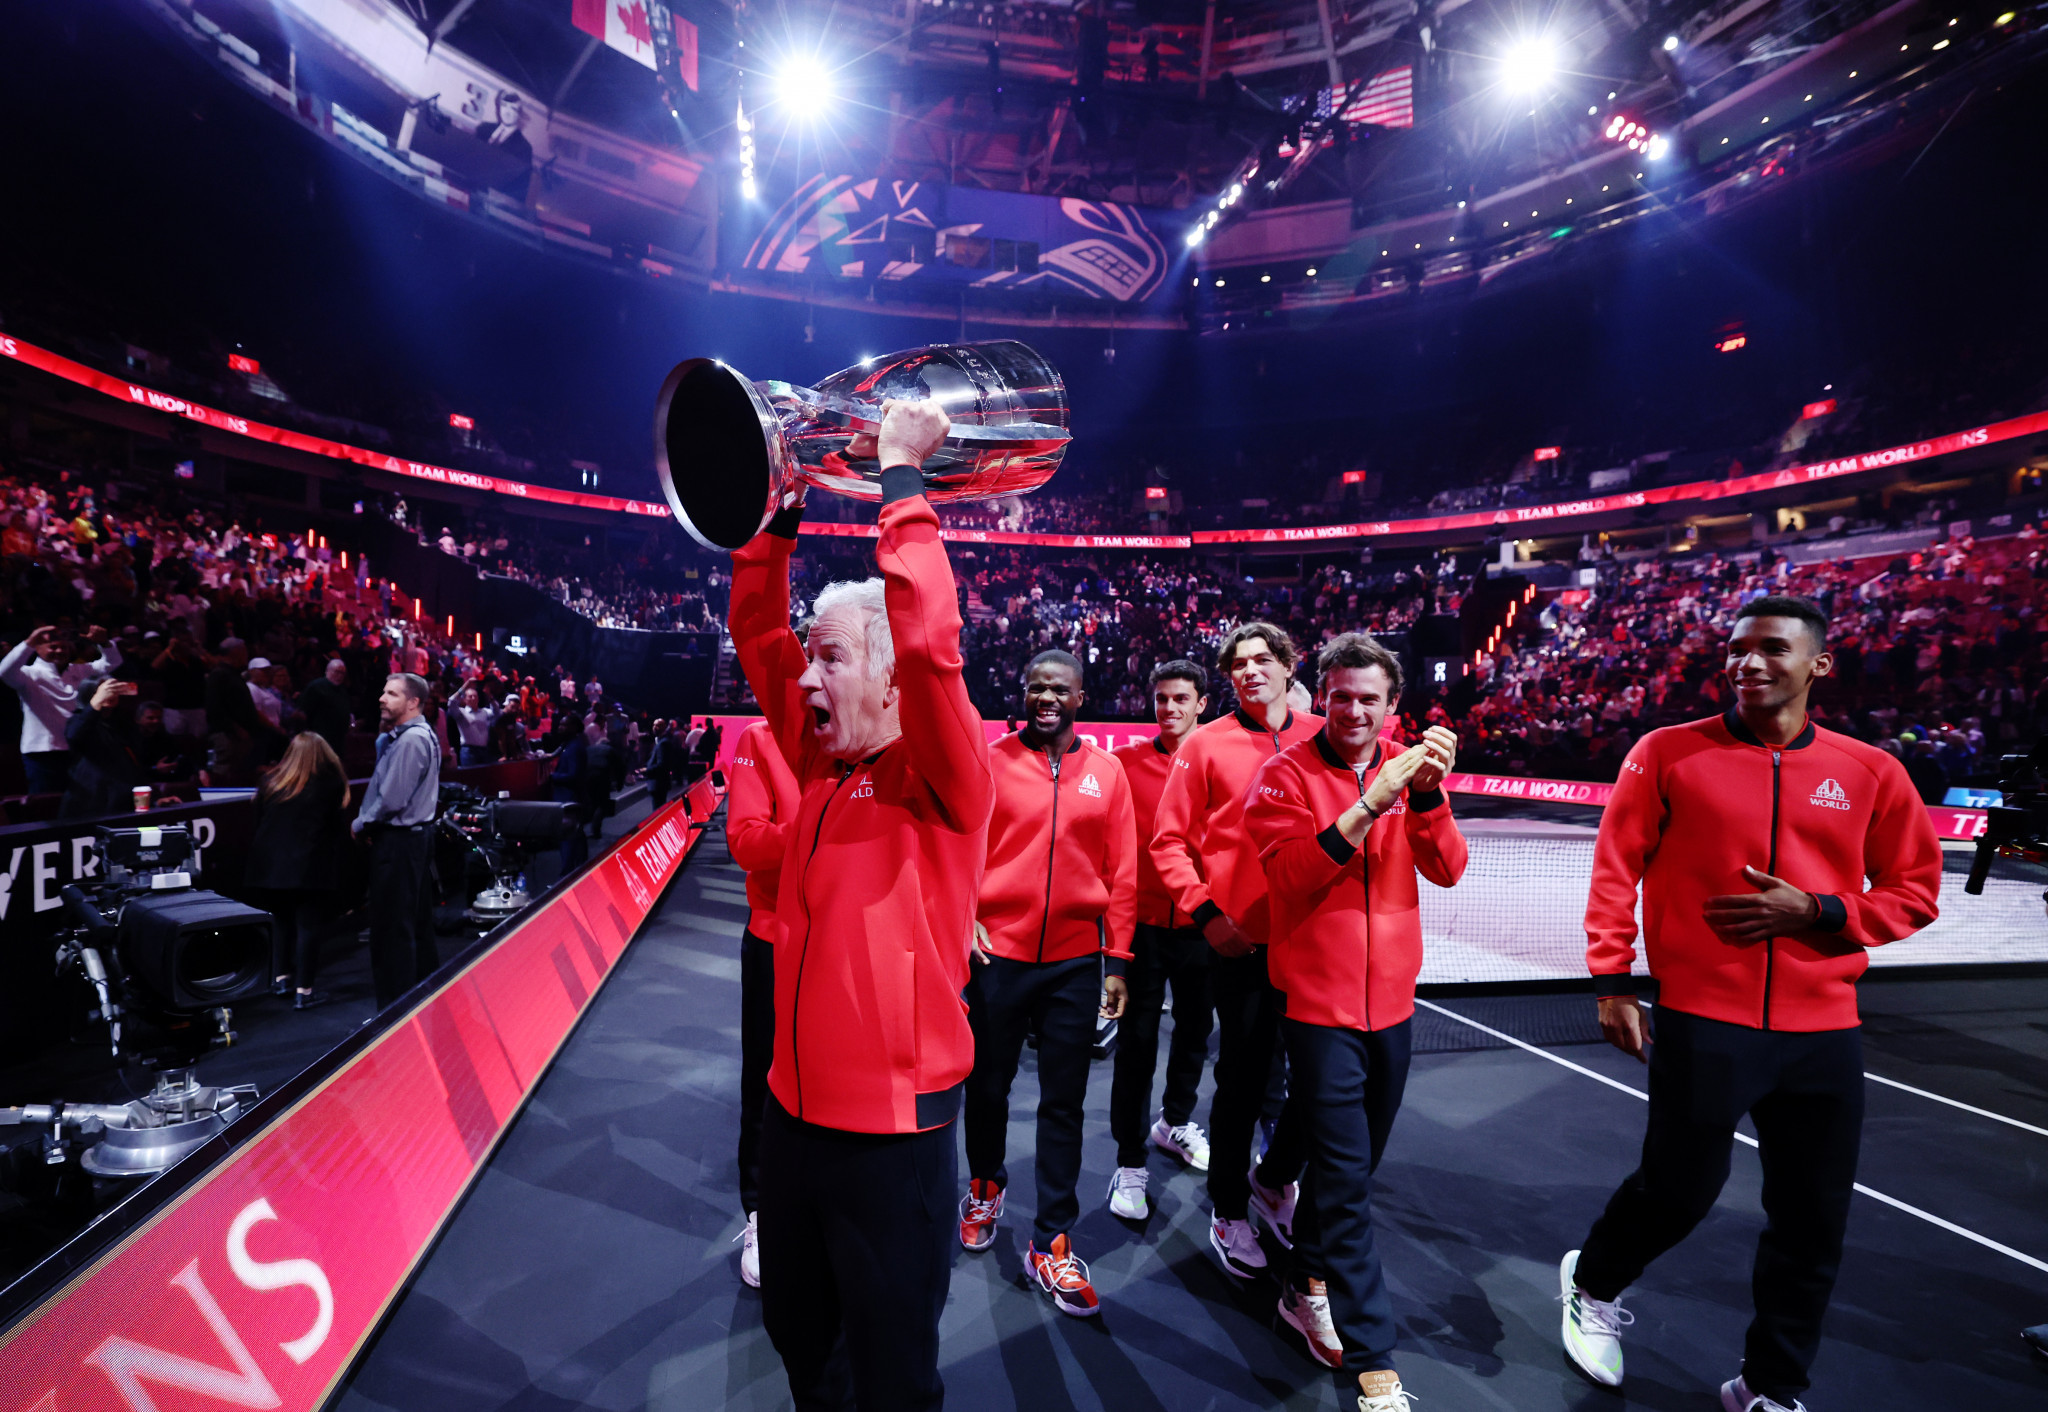 McEnroe and Team World lift Laver Cup again after dominating win